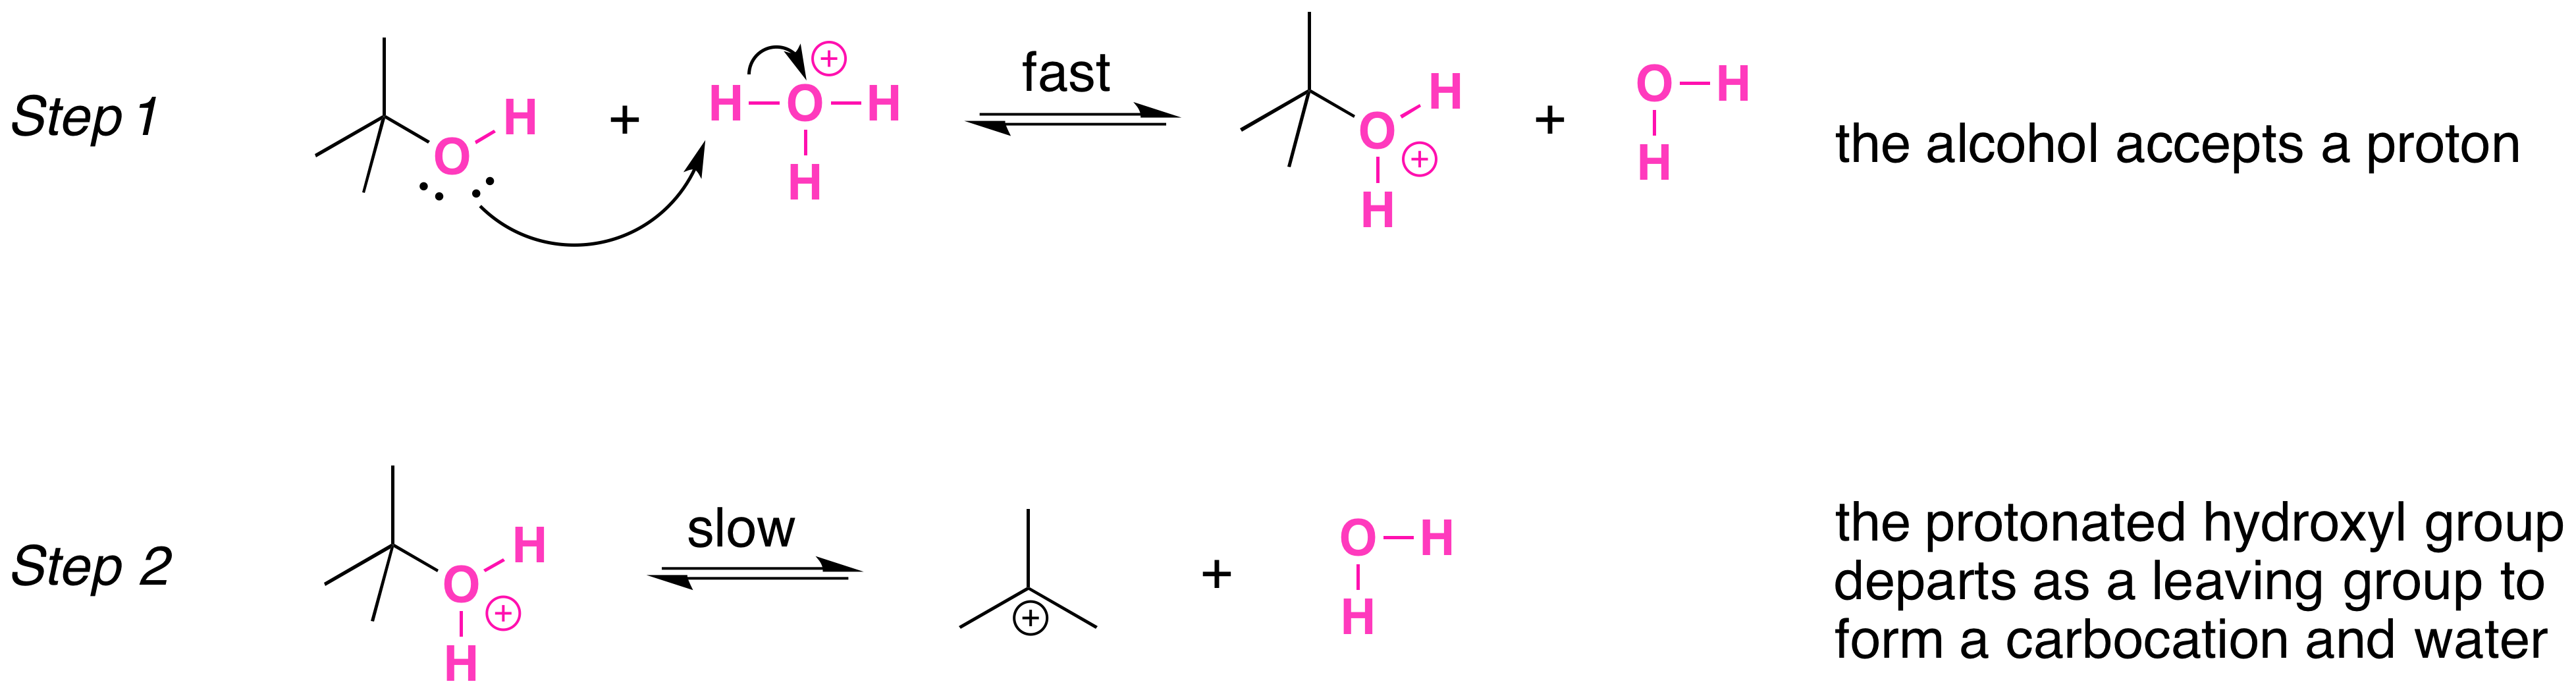 In the first step: the alcohol accepts a proton. In step 2: the protonated hydroxyl group departs as a leaving group to form a carbocation and water. 